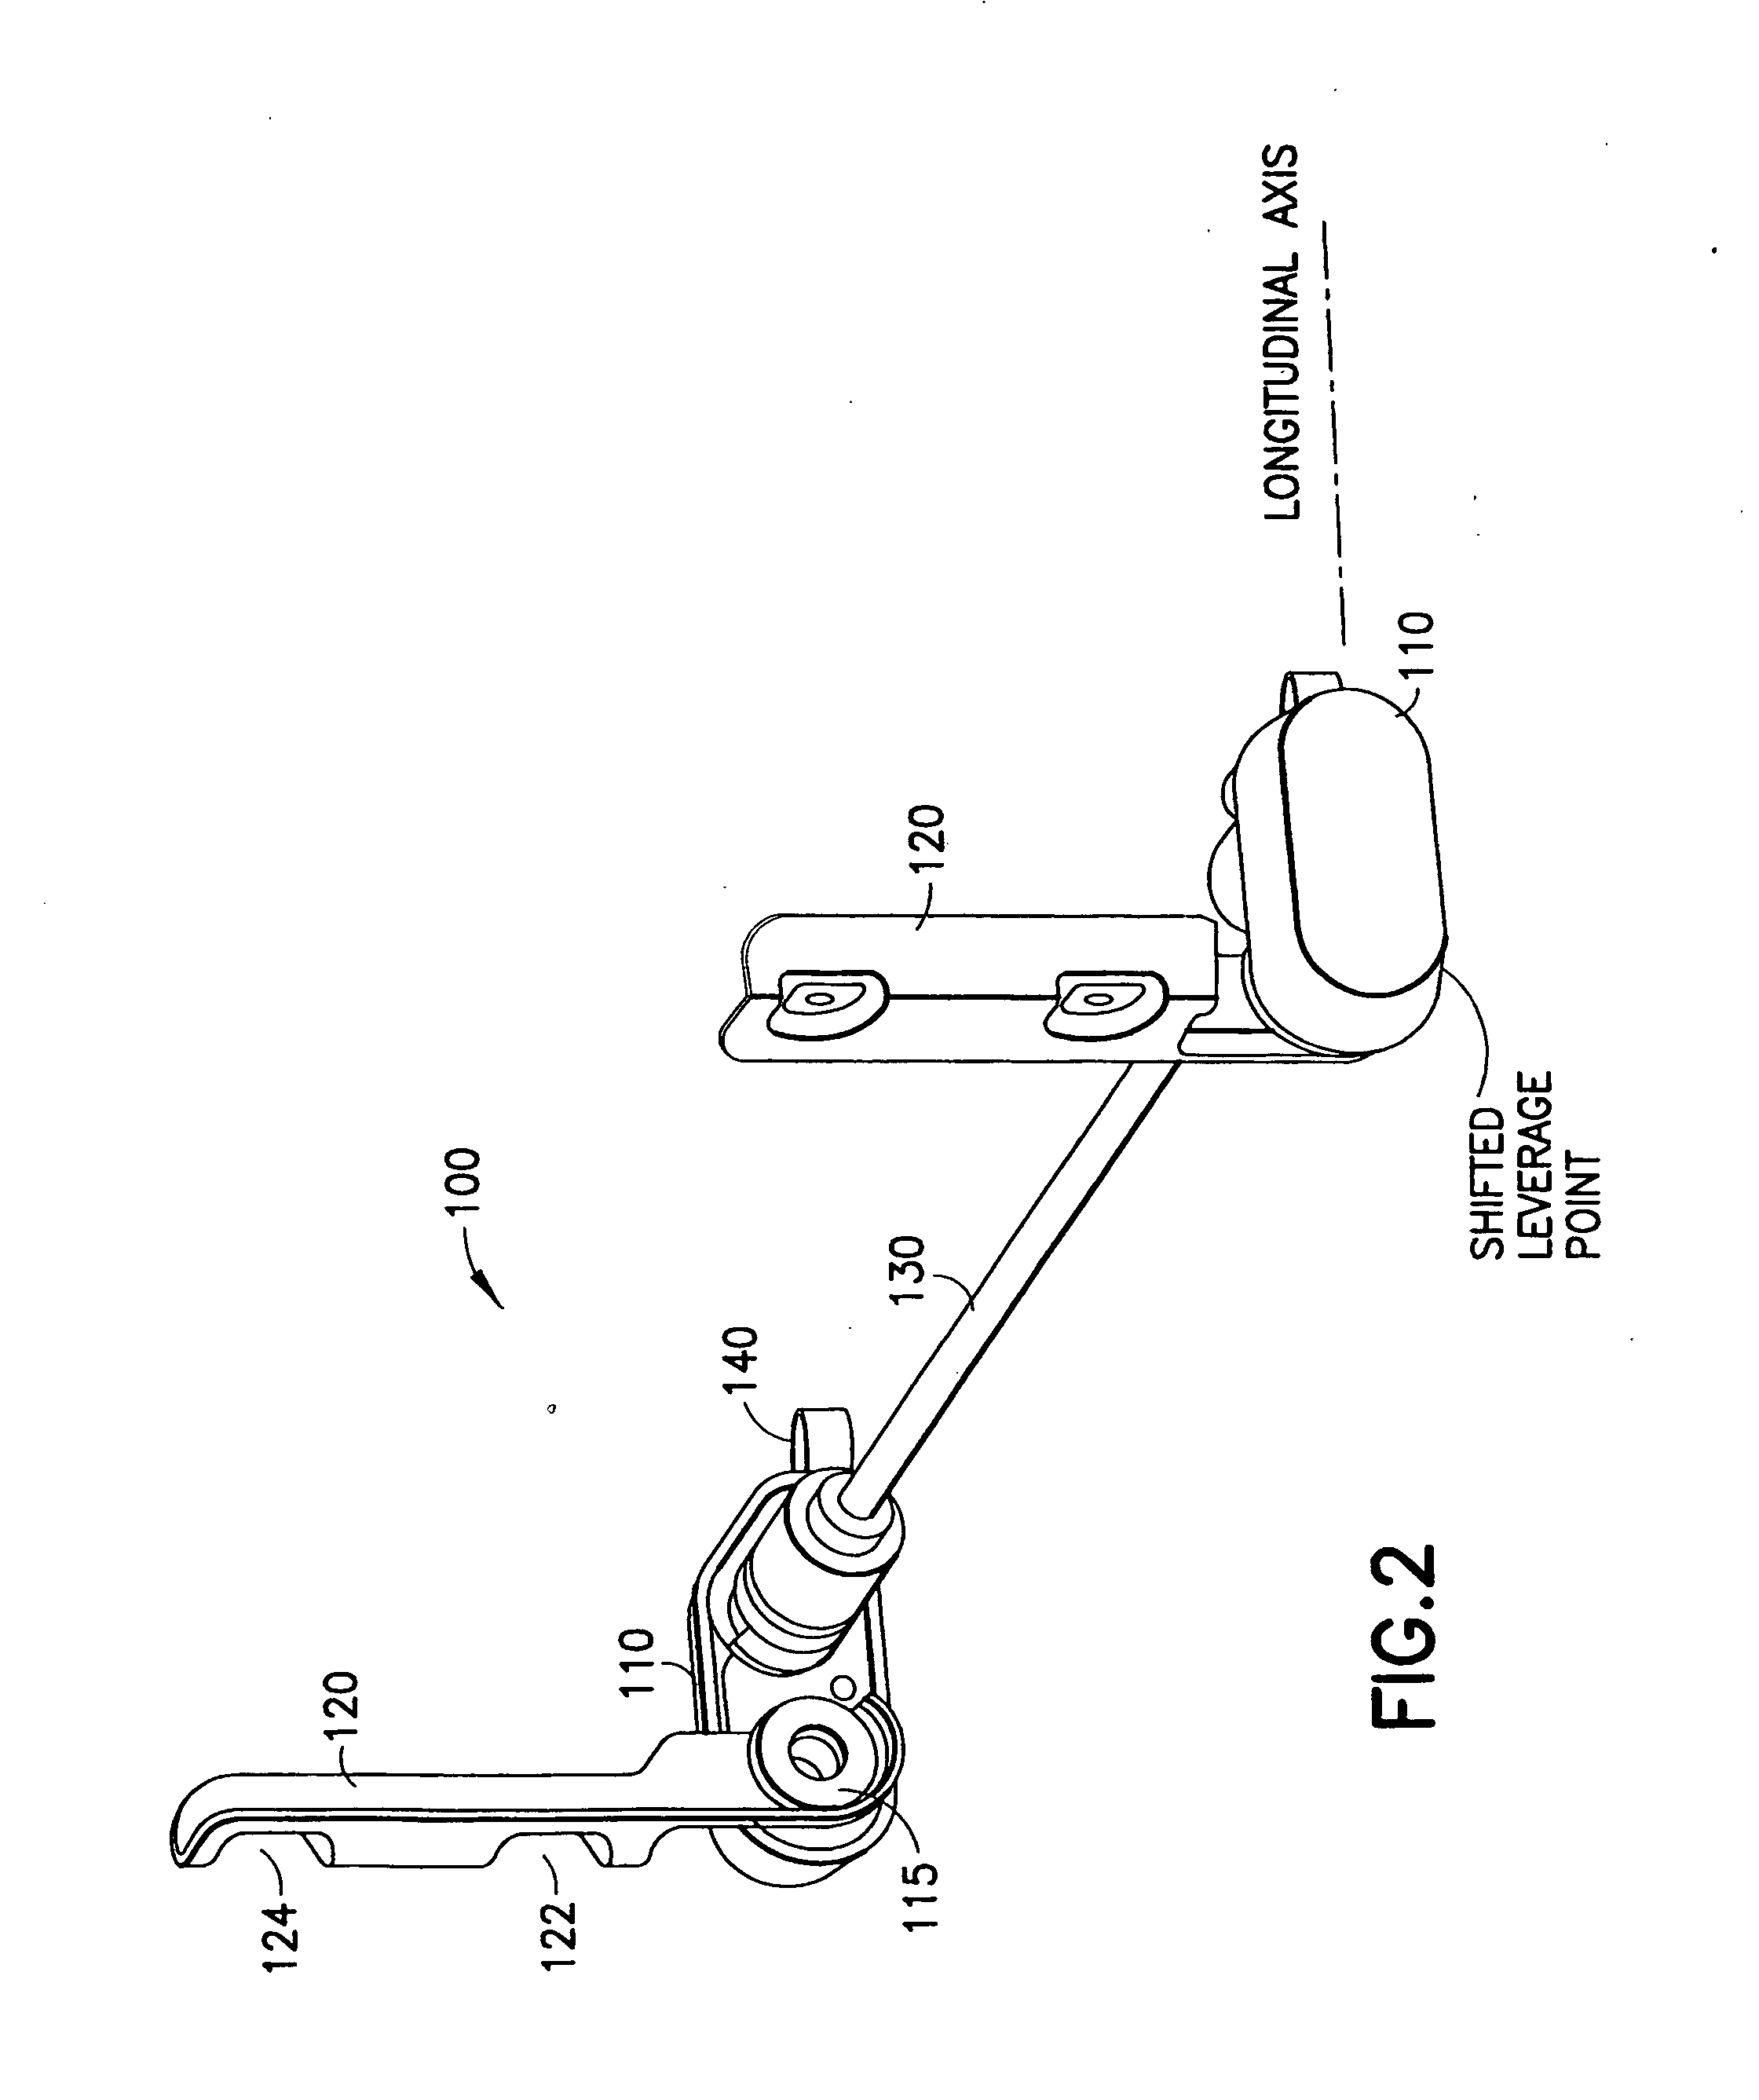 Double-axis hinge for use in electronic devices